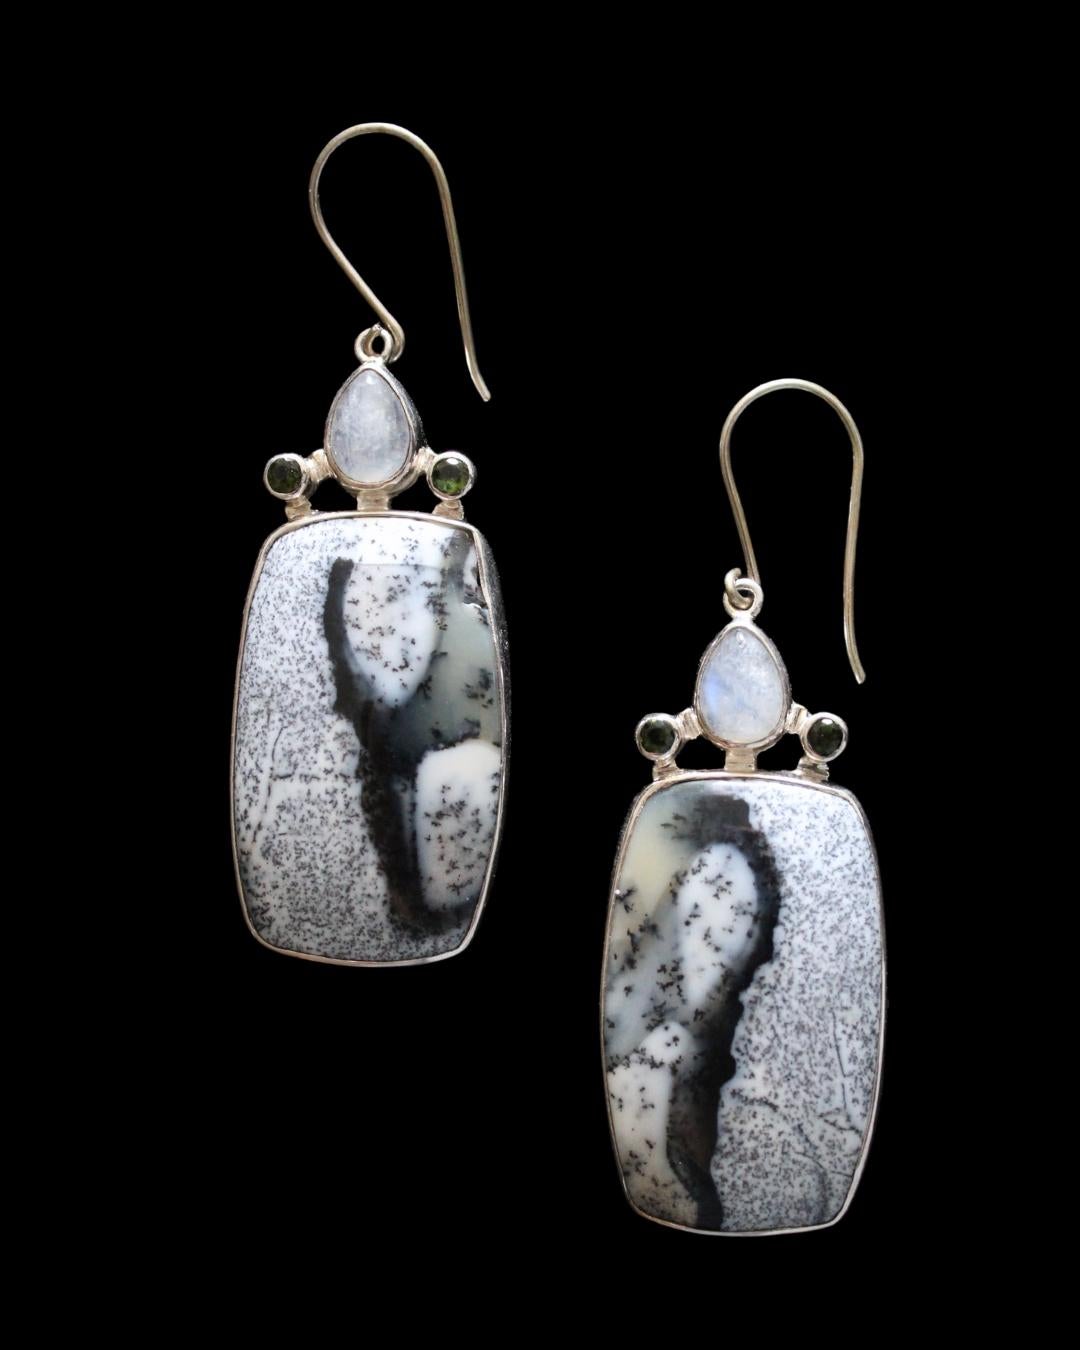 These stunning earrings feature rectangular cut dendritic opal cabochons accented with teardrop moonstones and faceted peridot accent stones. Dendritic opal, also known as dendritic agate, has an opalescent surface and contains small, branching tree